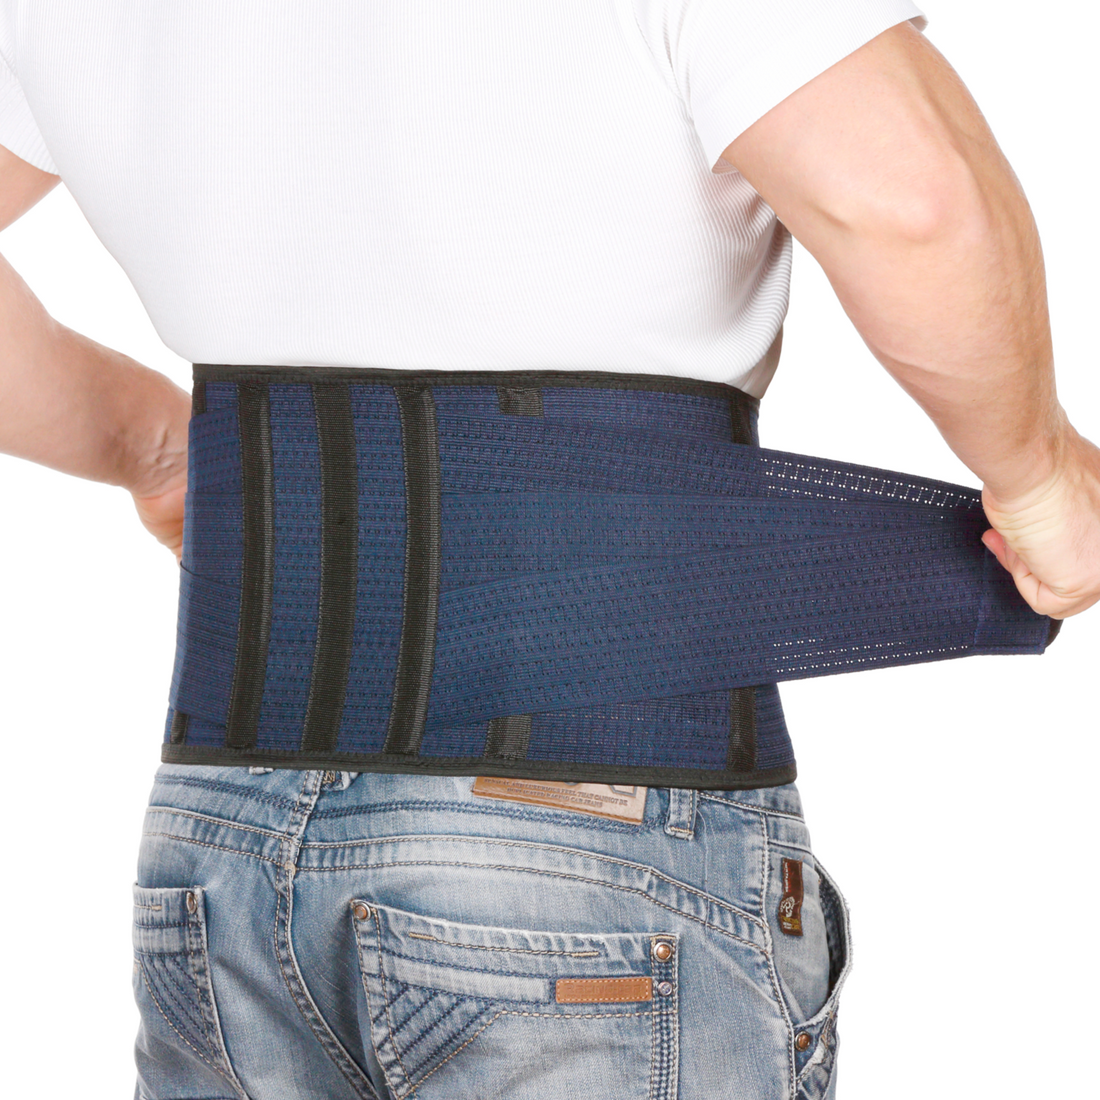 AVESTON® Back Support Lower Back Brace for Back Pain Relief | Lumbar Support Belt